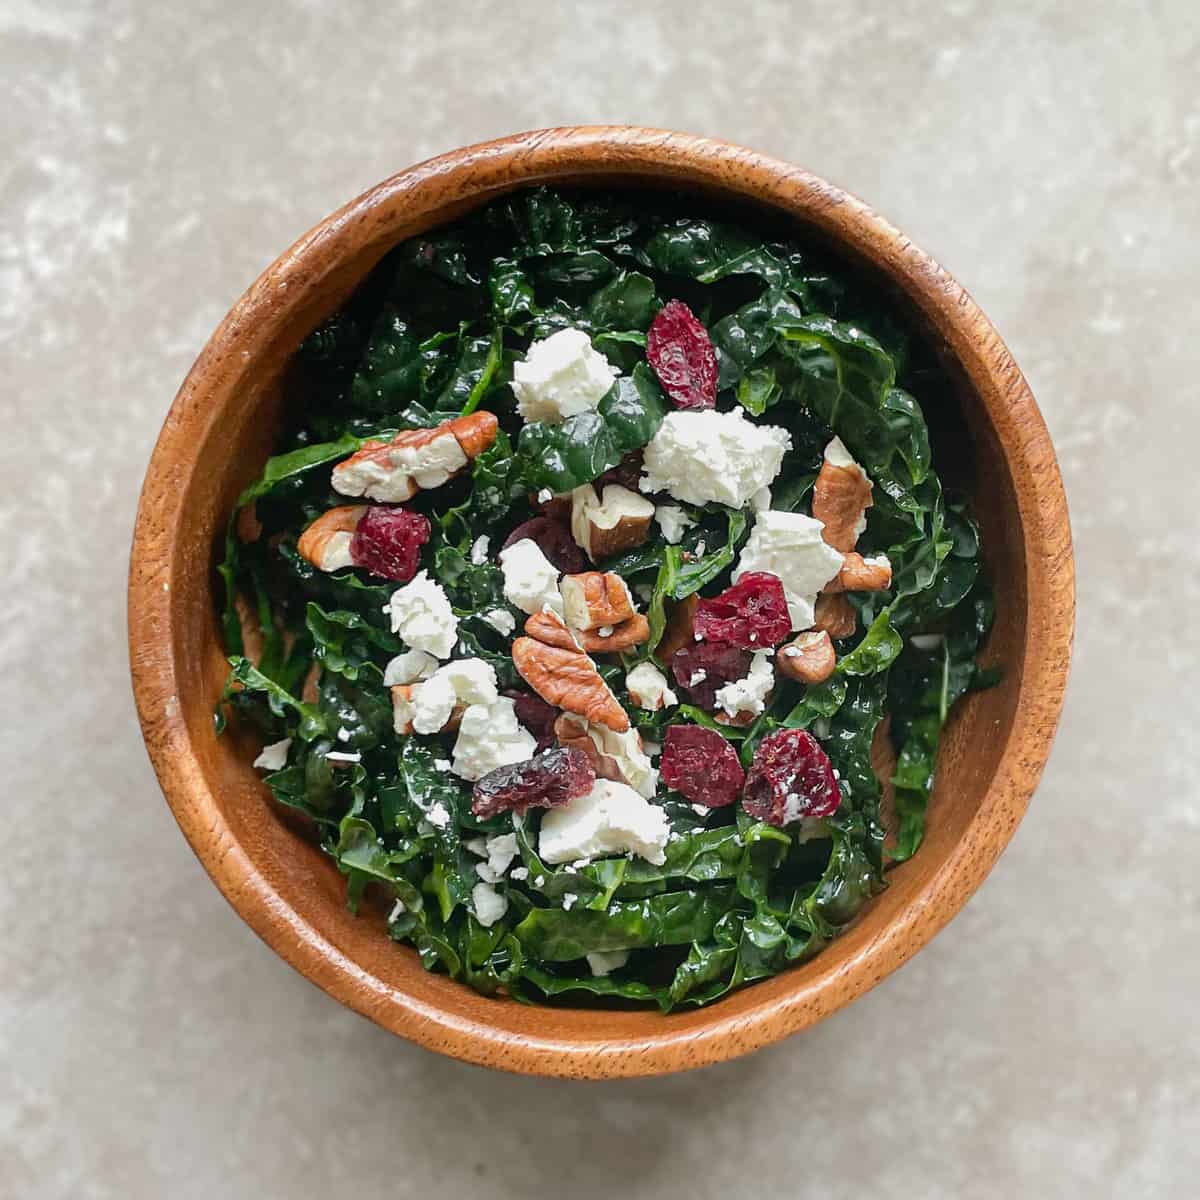 salad bowl with shredded kale, cranberries, pecans, and feta.